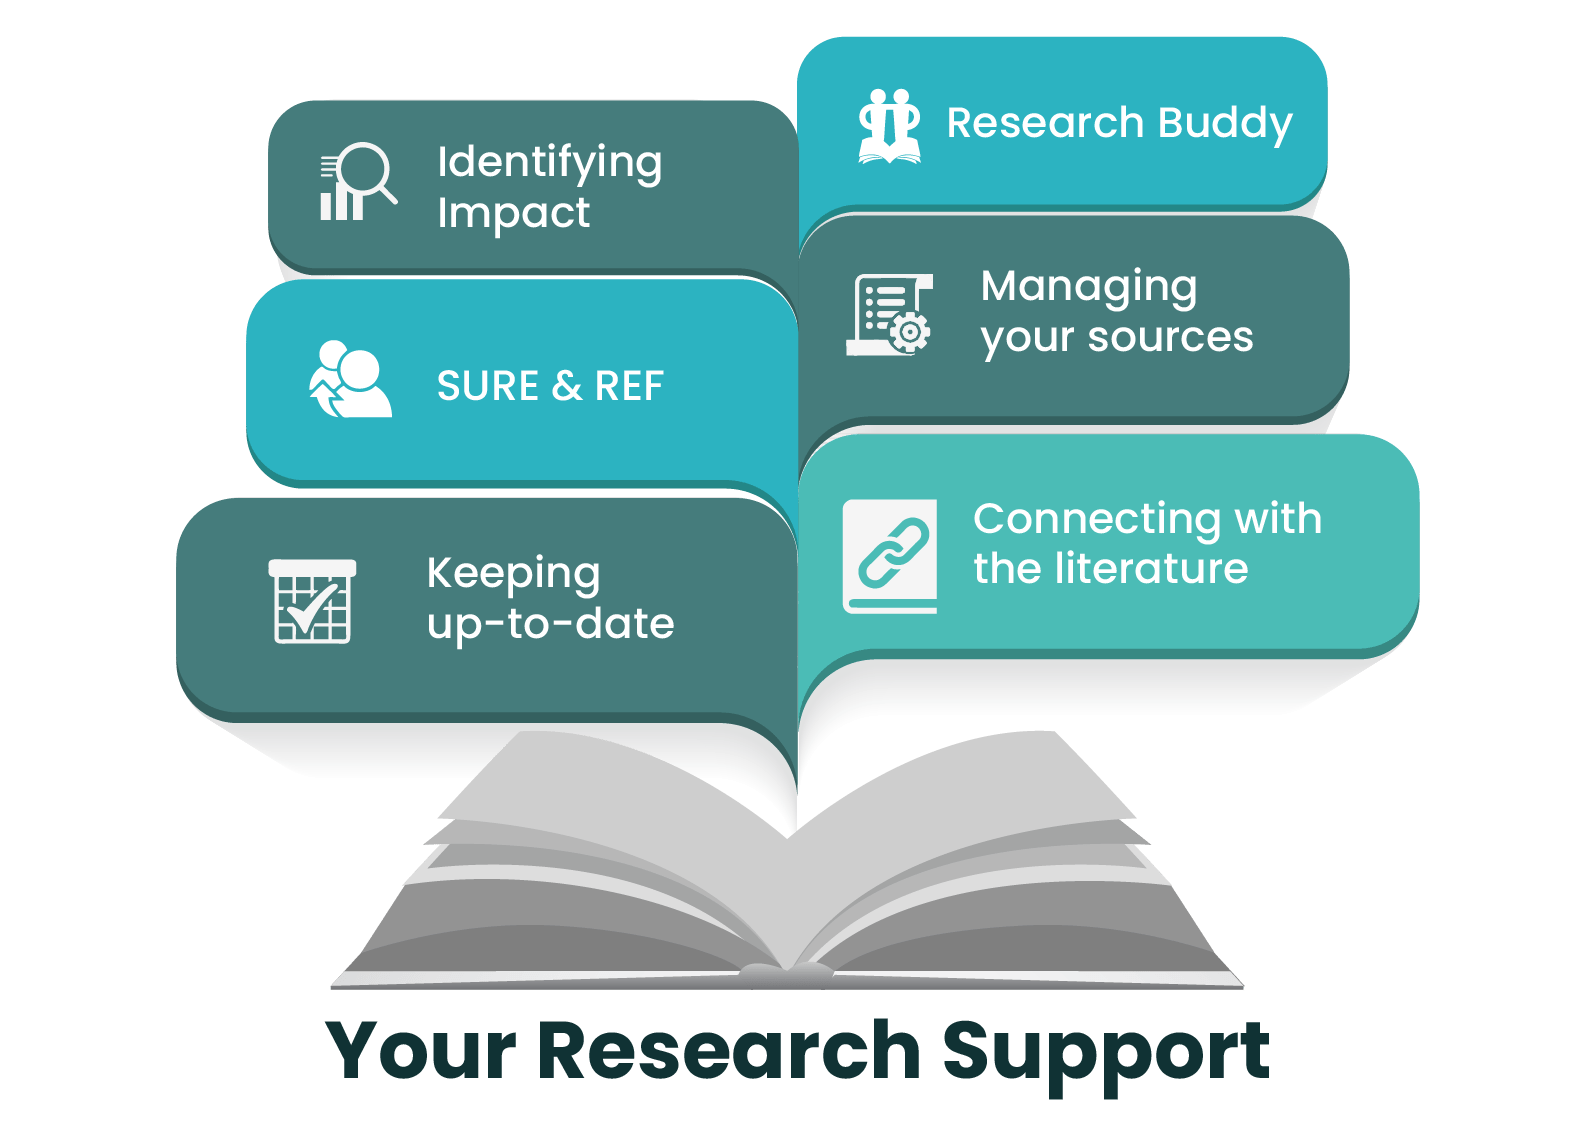 Your research support